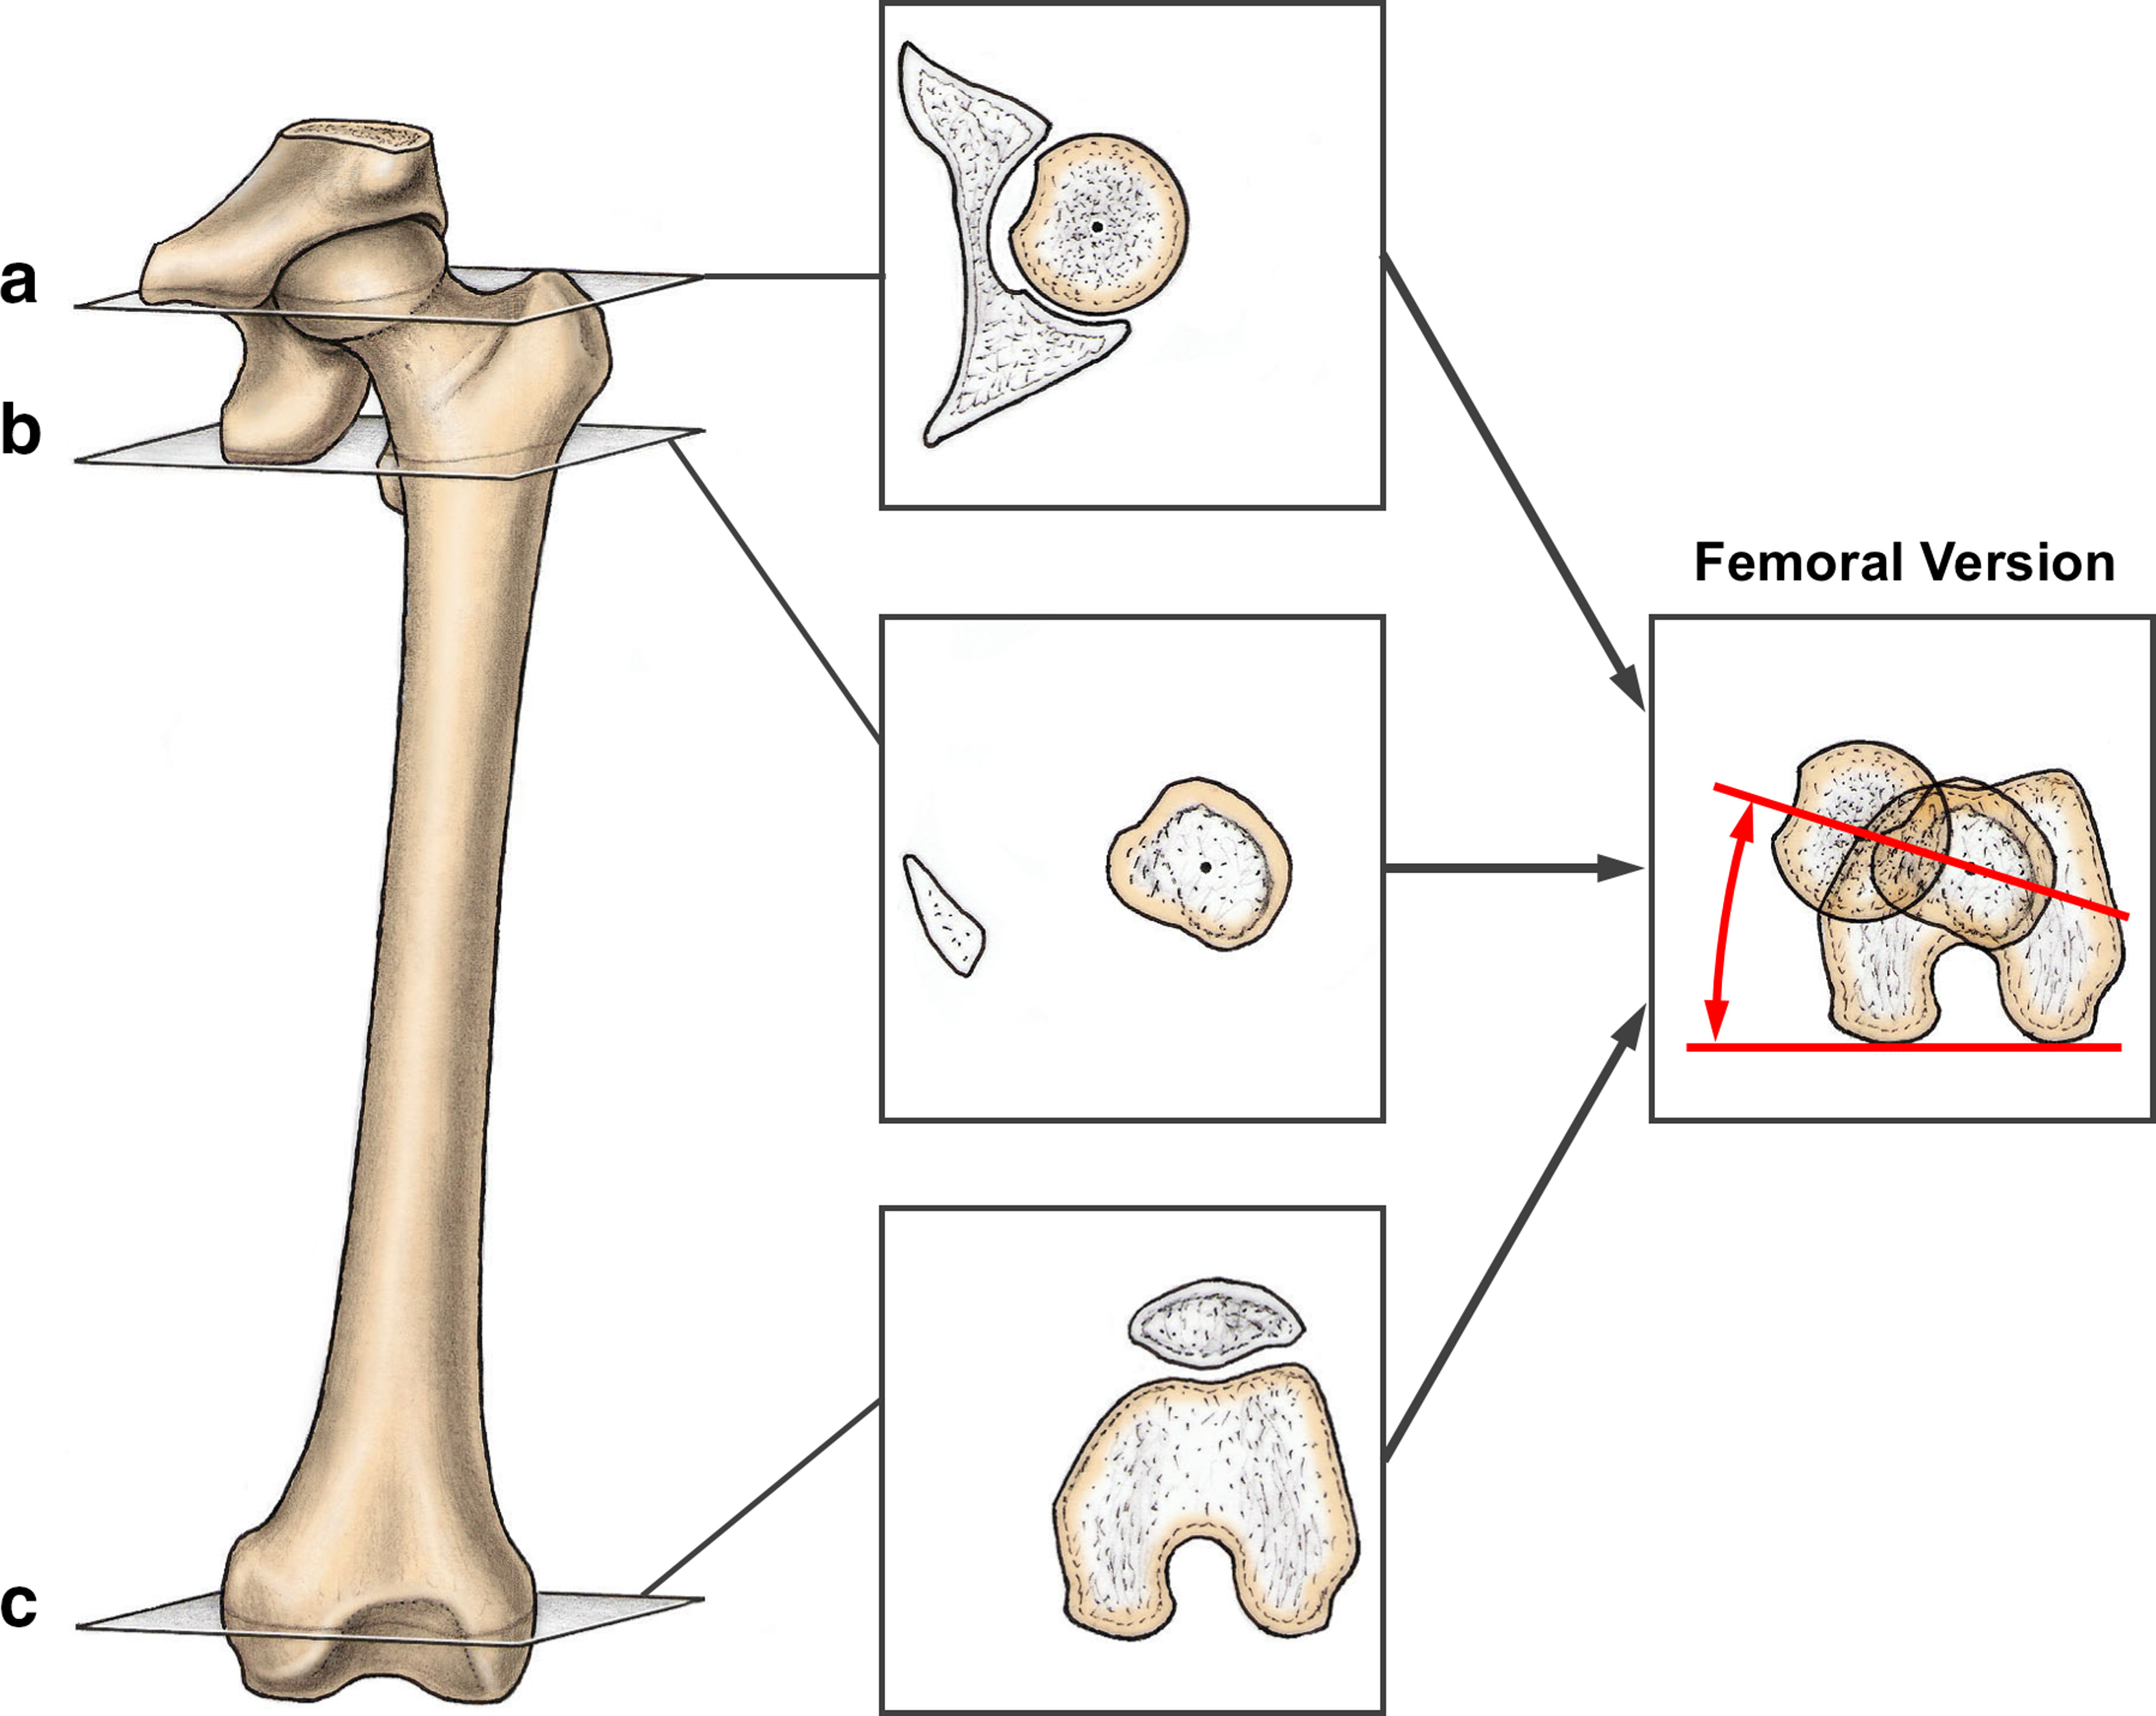 Fig. 2 
          Measurement of femoral version using the method described by Murphy et al20 is shown using three axial (transverse) CT or MR images. Femoral version is calculated using a line connecting a) the femoral head centre, b) the base of the femoral neck, and c) the posterior condylar axis of the distal femur. Figure reprinted with permission from Lerch et al.14
        